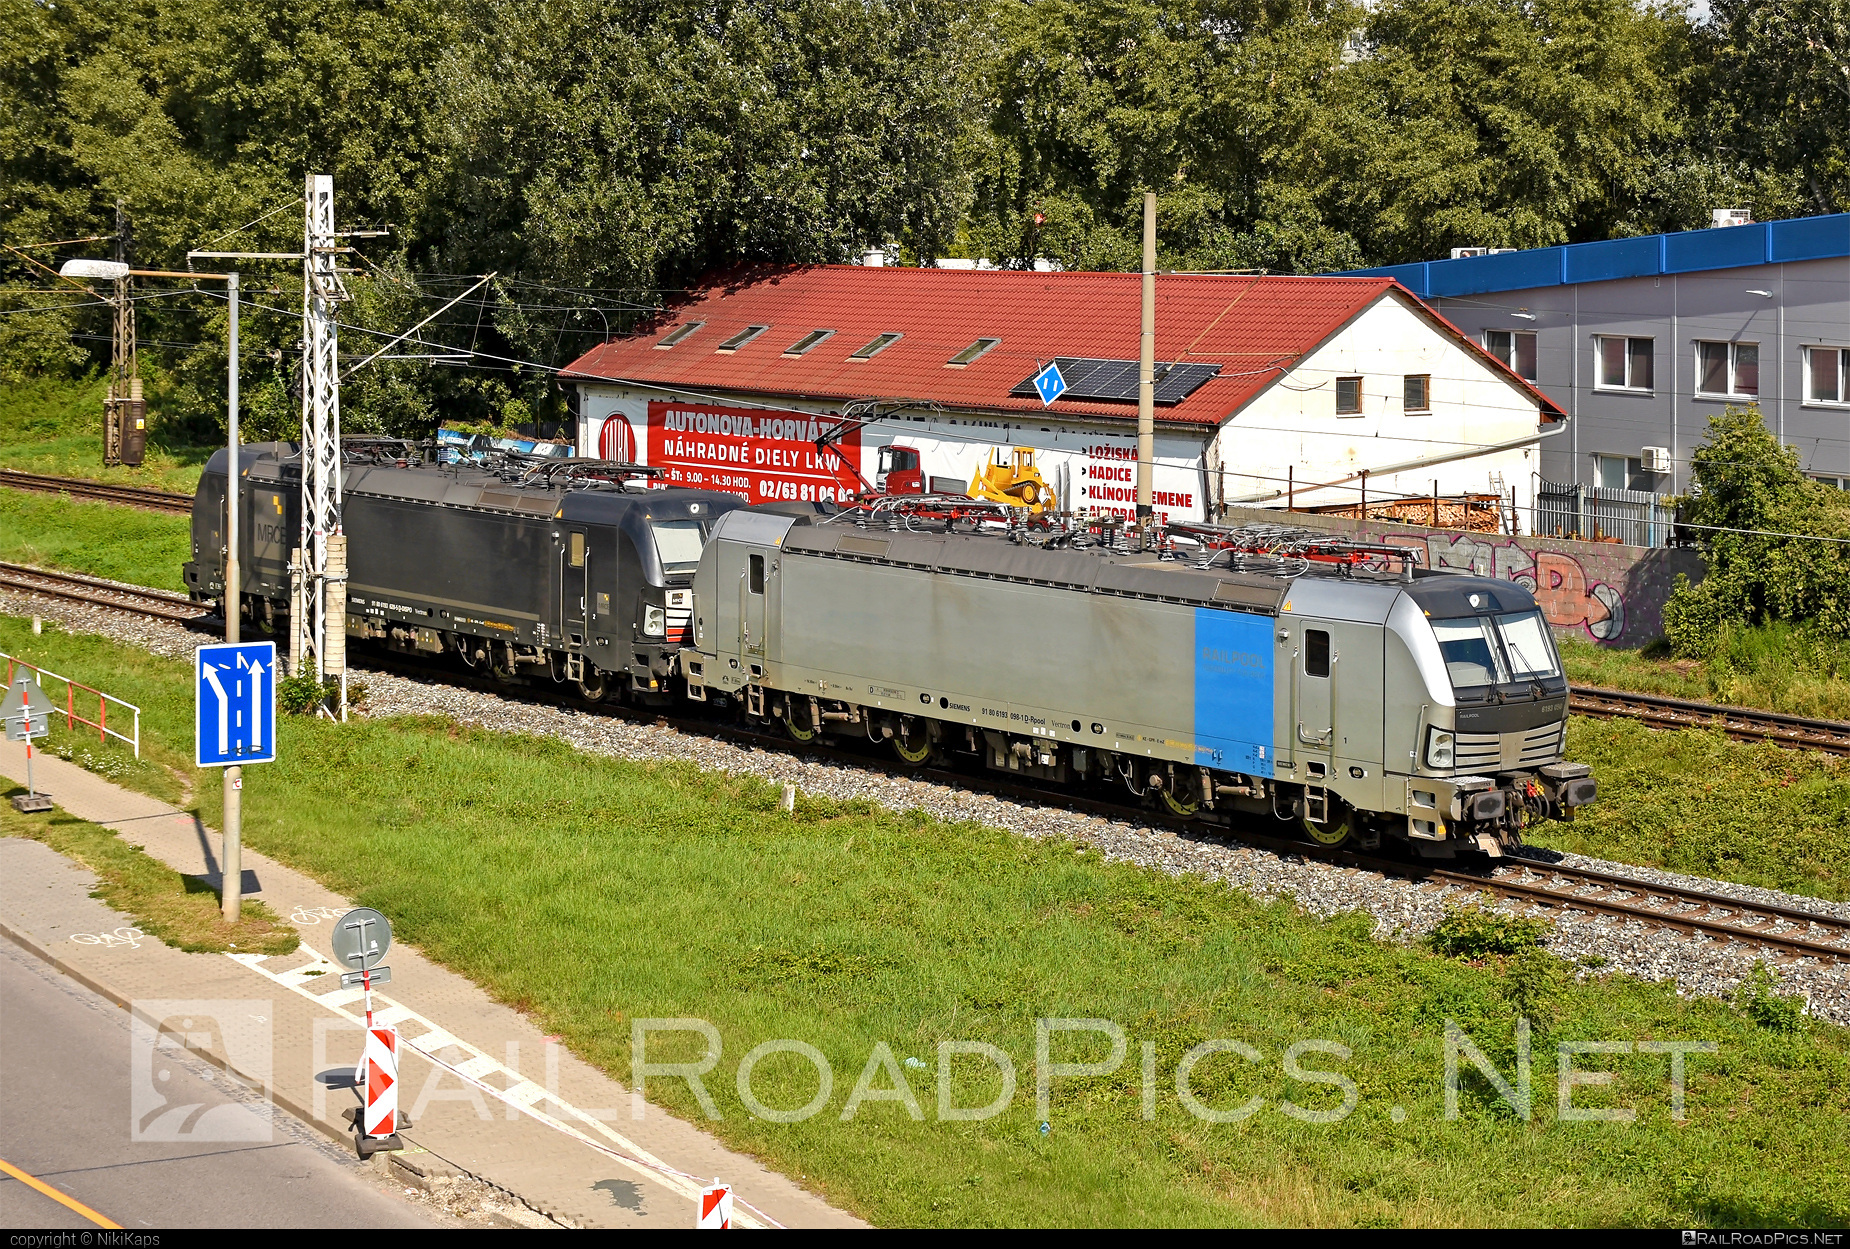 Siemens Vectron MS - 6193 098 operated by ecco-rail GmbH #eccorail #eccorailgmbh #railpool #railpoolgmbh #siemens #siemensVectron #siemensVectronMS #vectron #vectronMS